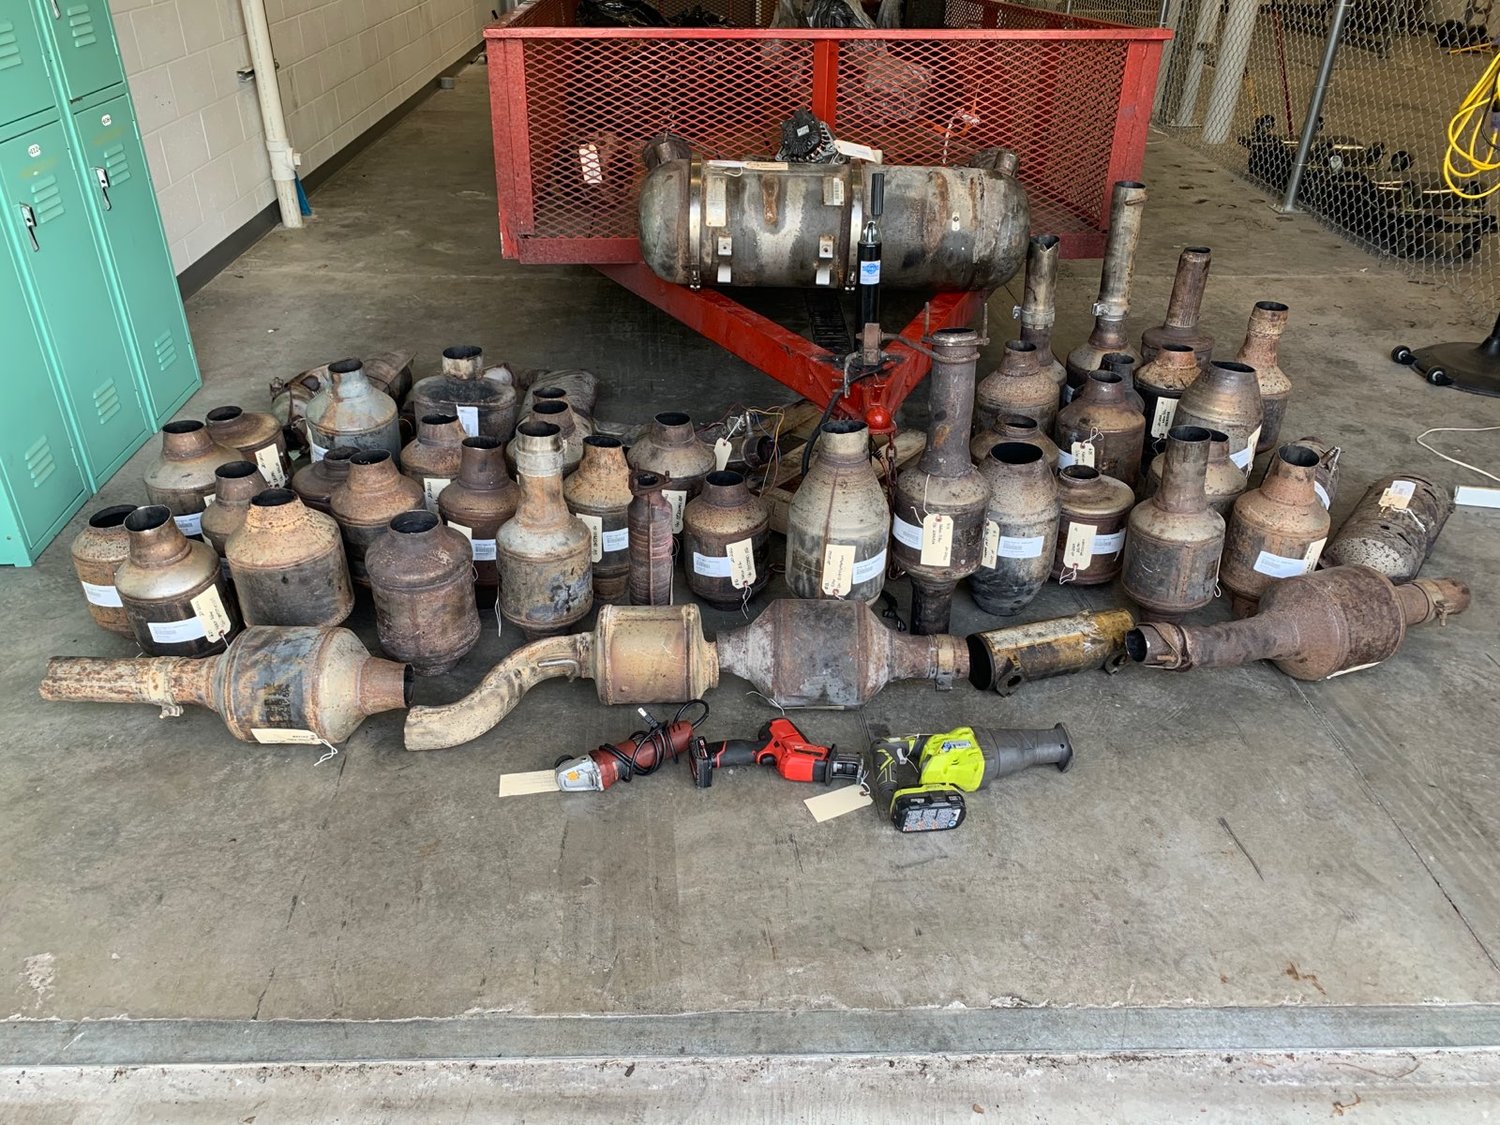 5 Arrested, $15k Seized In Catalytic Converter Theft Sting | WNDB